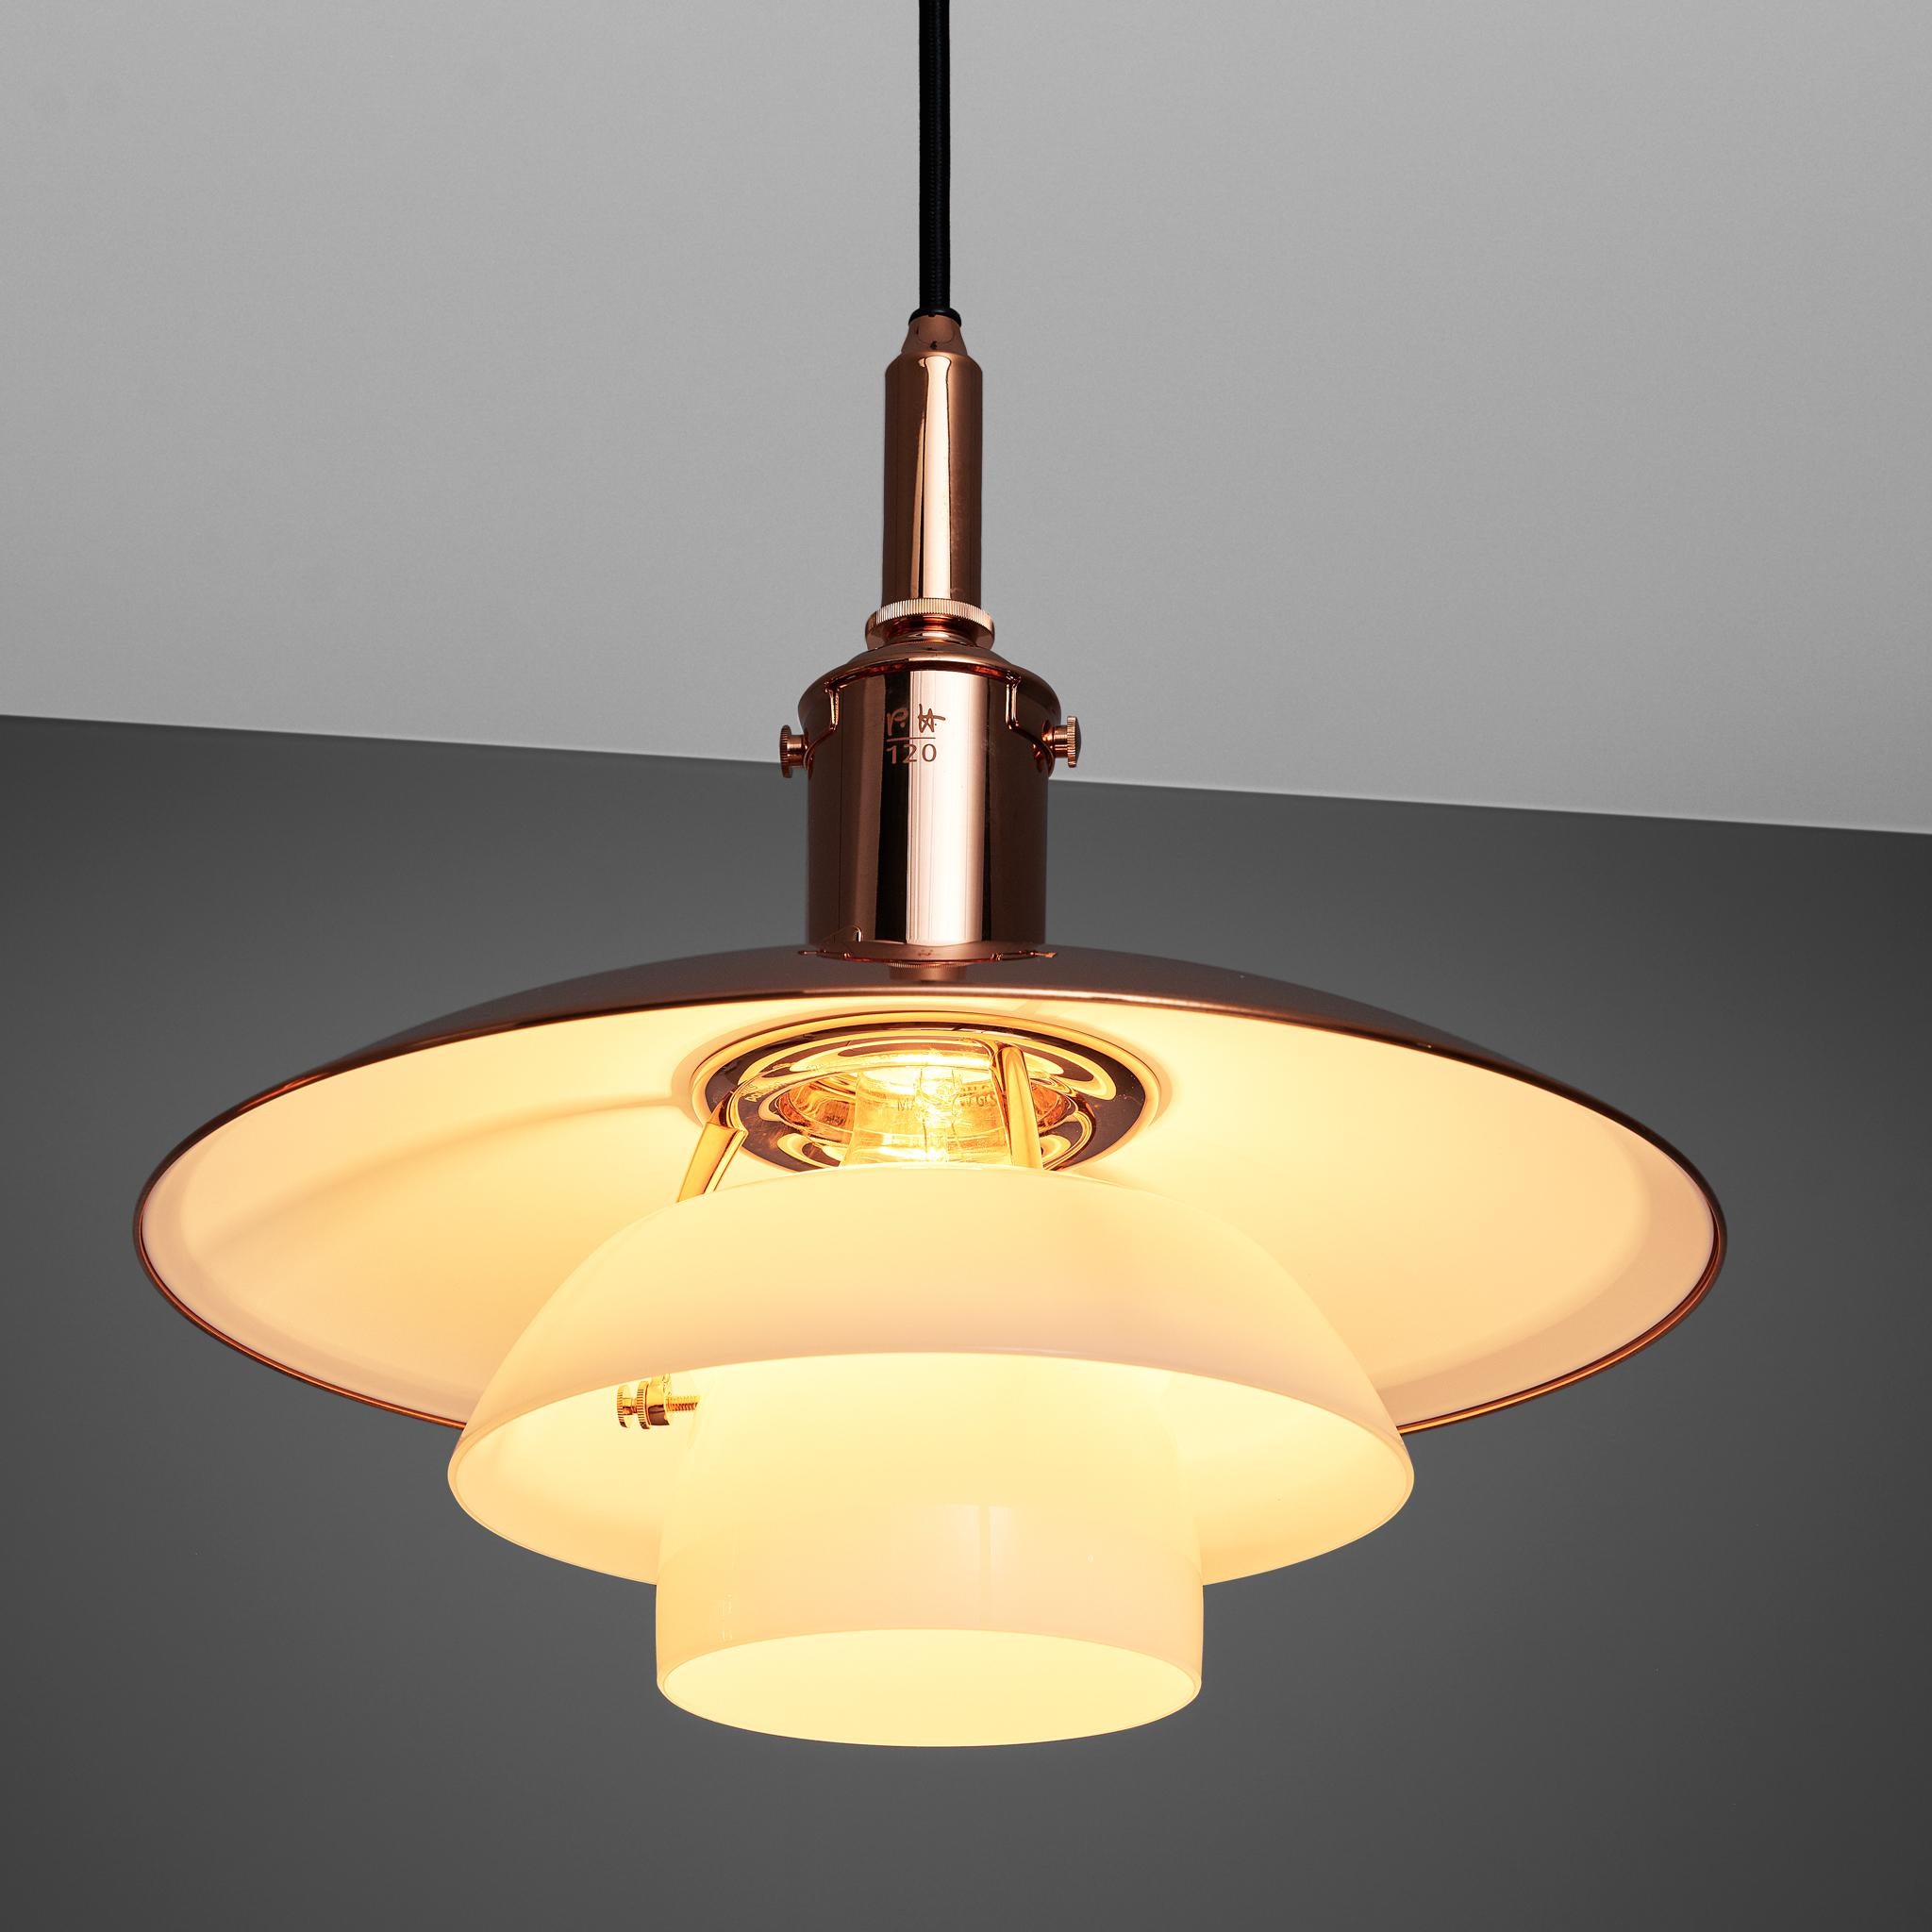 Early 20th Century Limited Edition Poul Henningsen Pendants in Copper